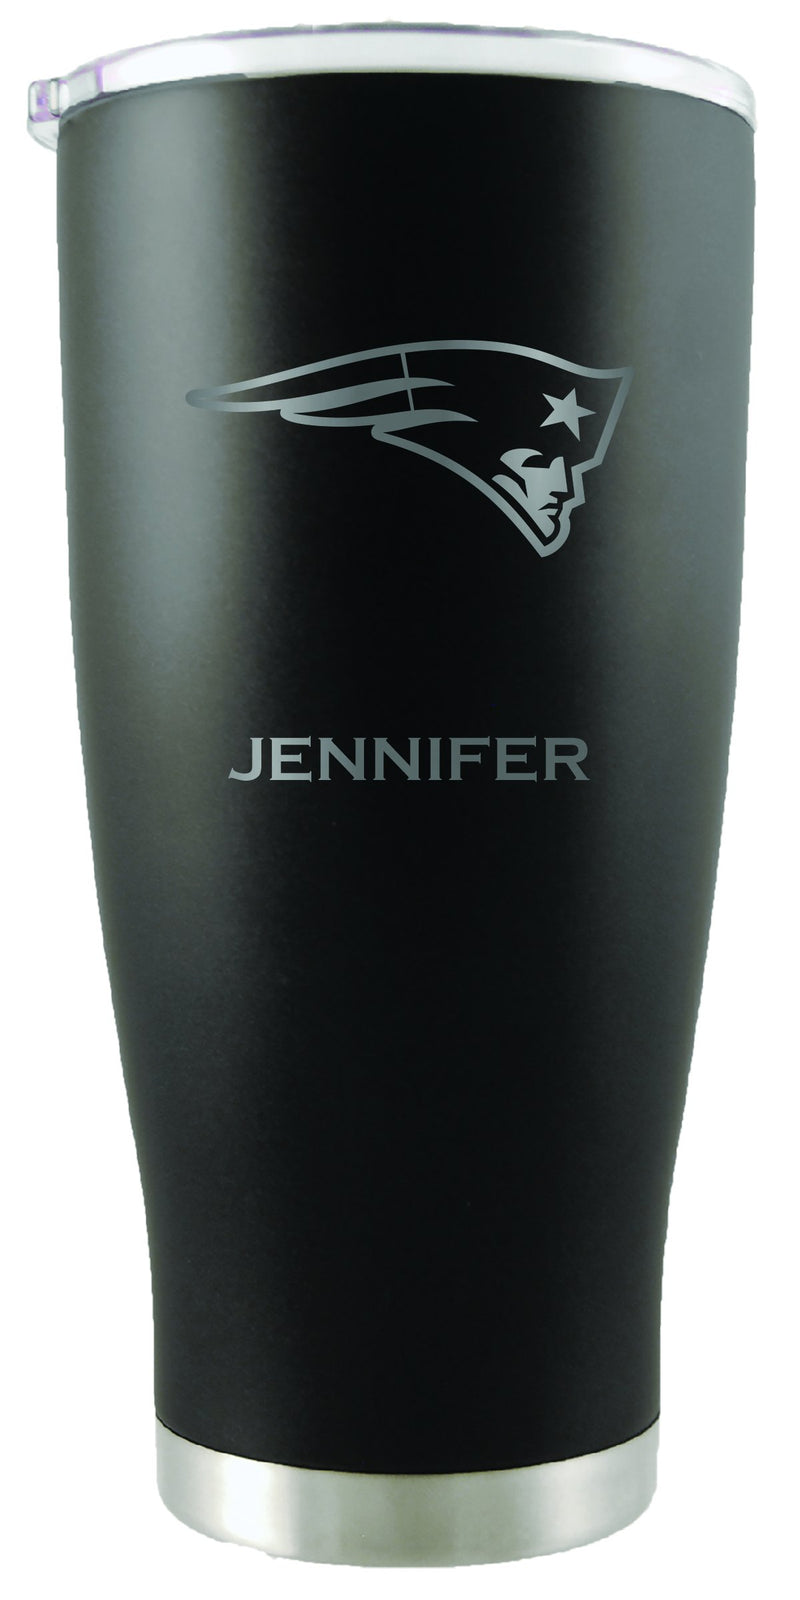 20oz Black Personalized Stainless Steel Tumbler | New England Patriots
CurrentProduct, Drinkware_category_All, NEP, New England Patriots, NFL, Personalized_Personalized, Stainless Steel
The Memory Company